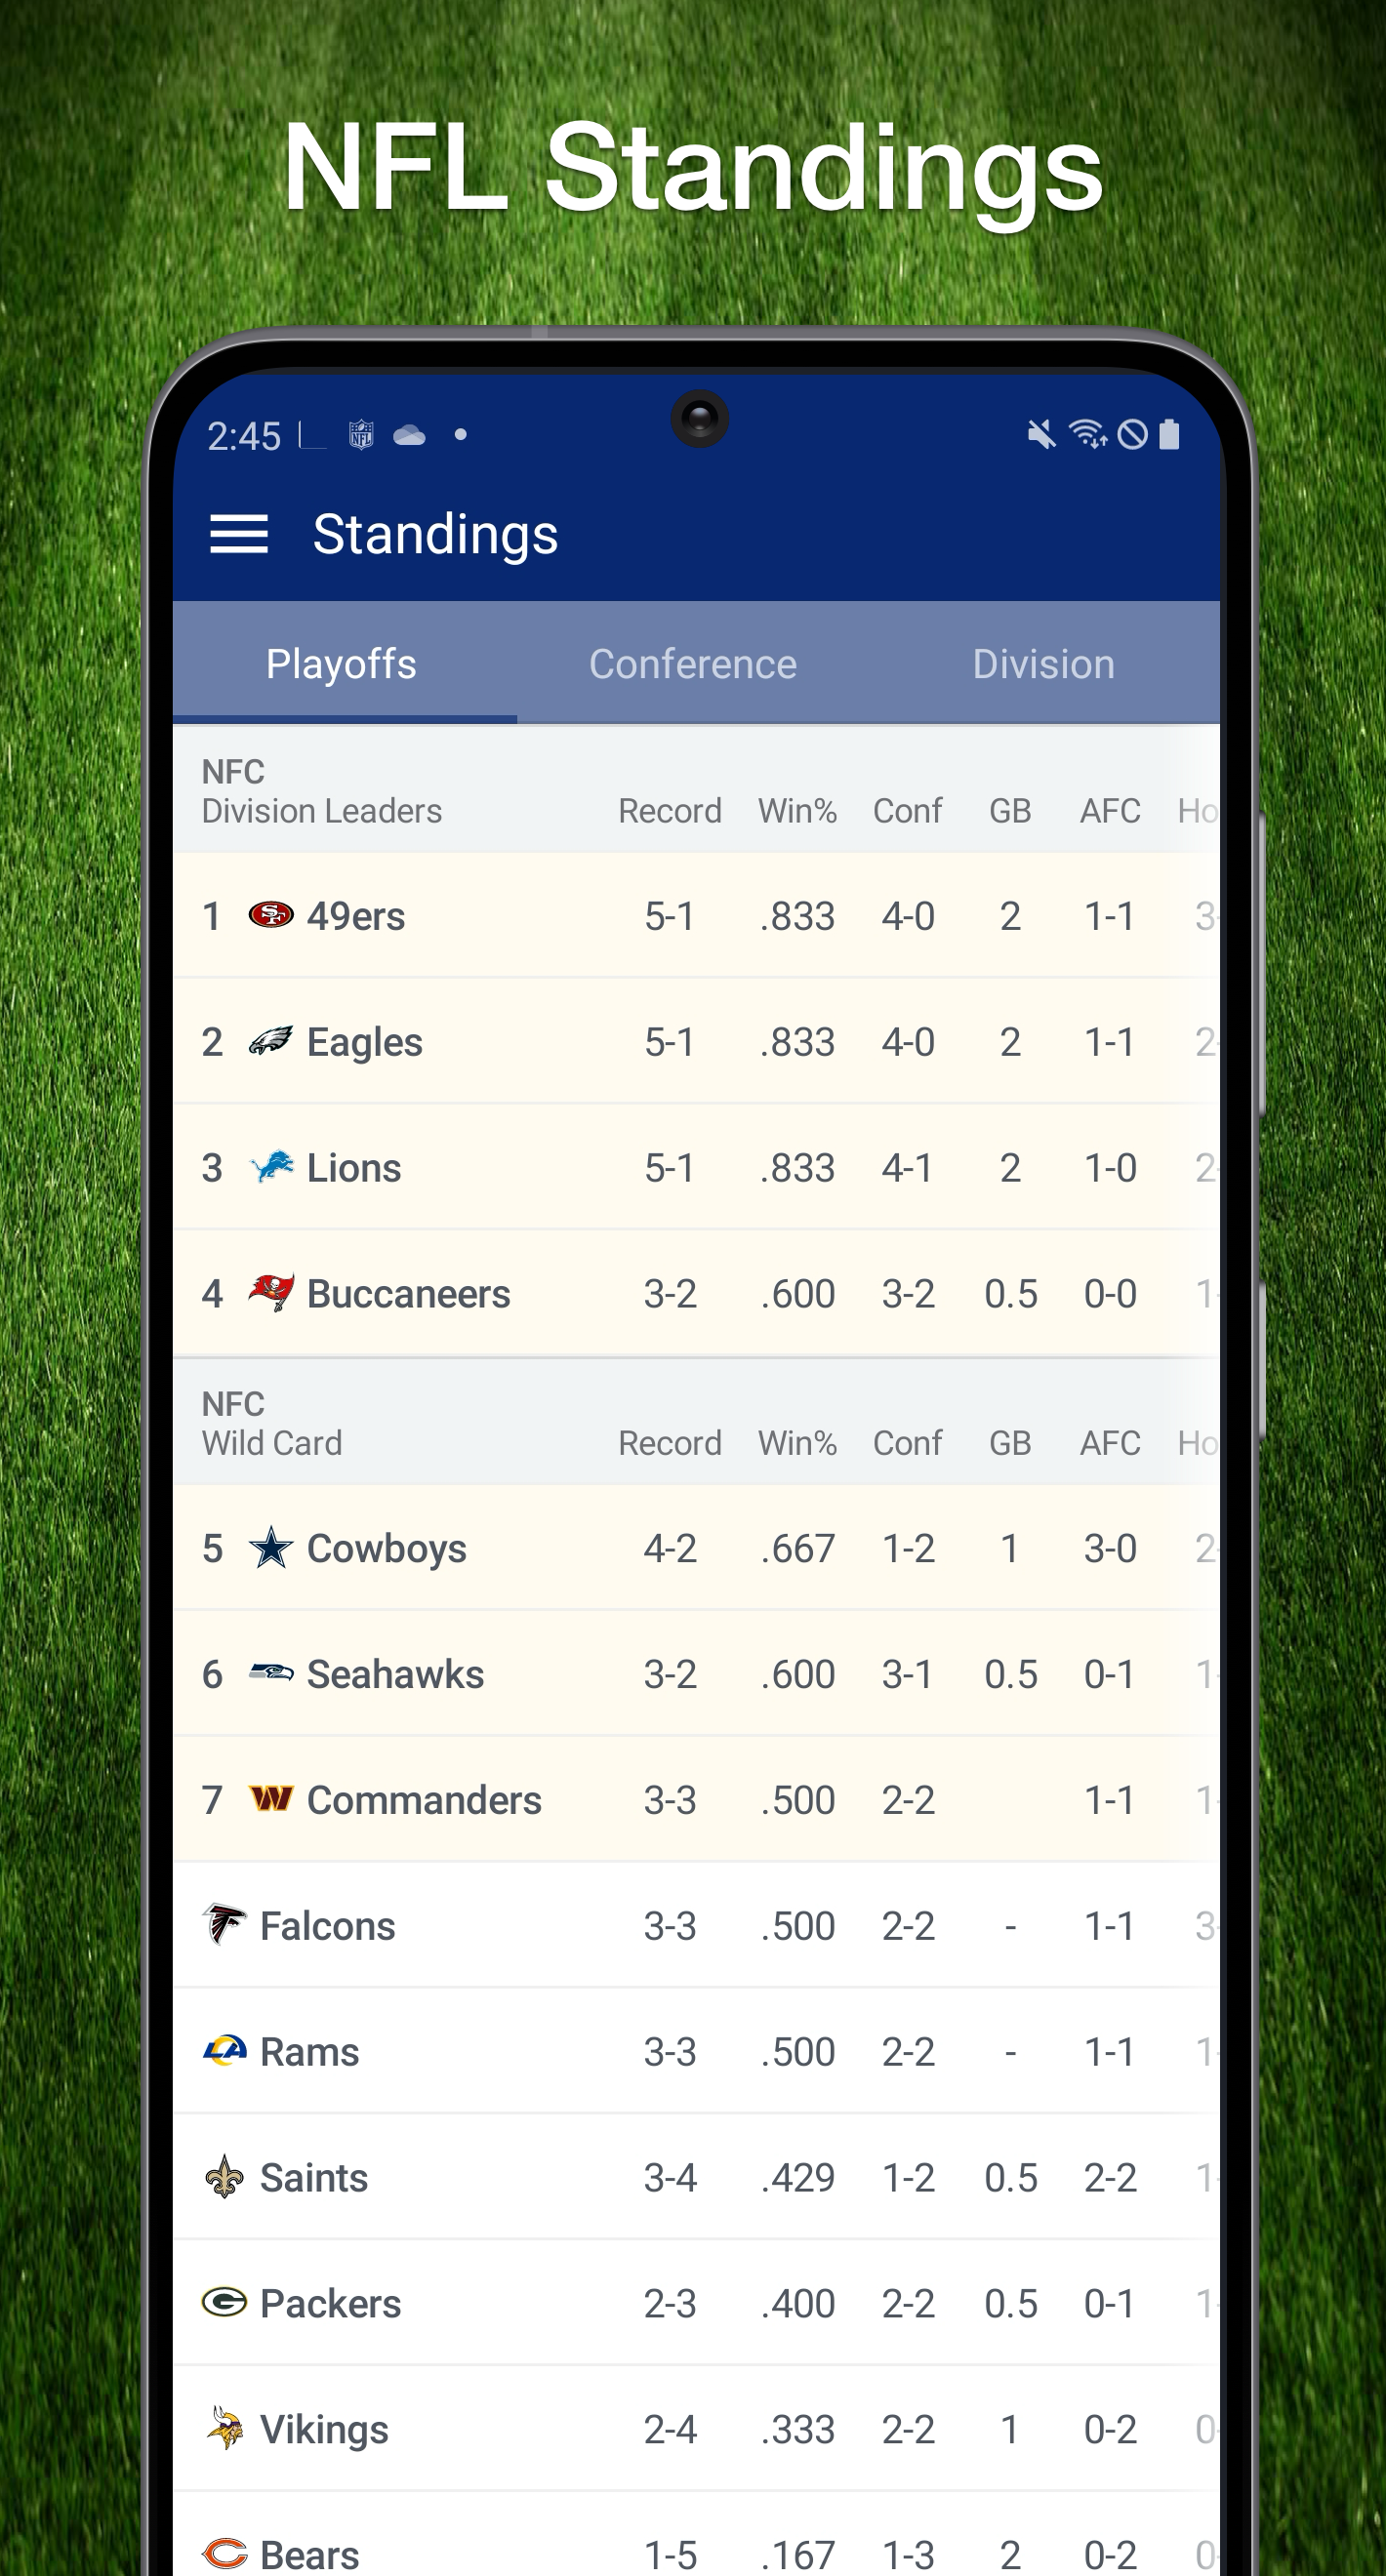 NFL conference, division, and playoff standings